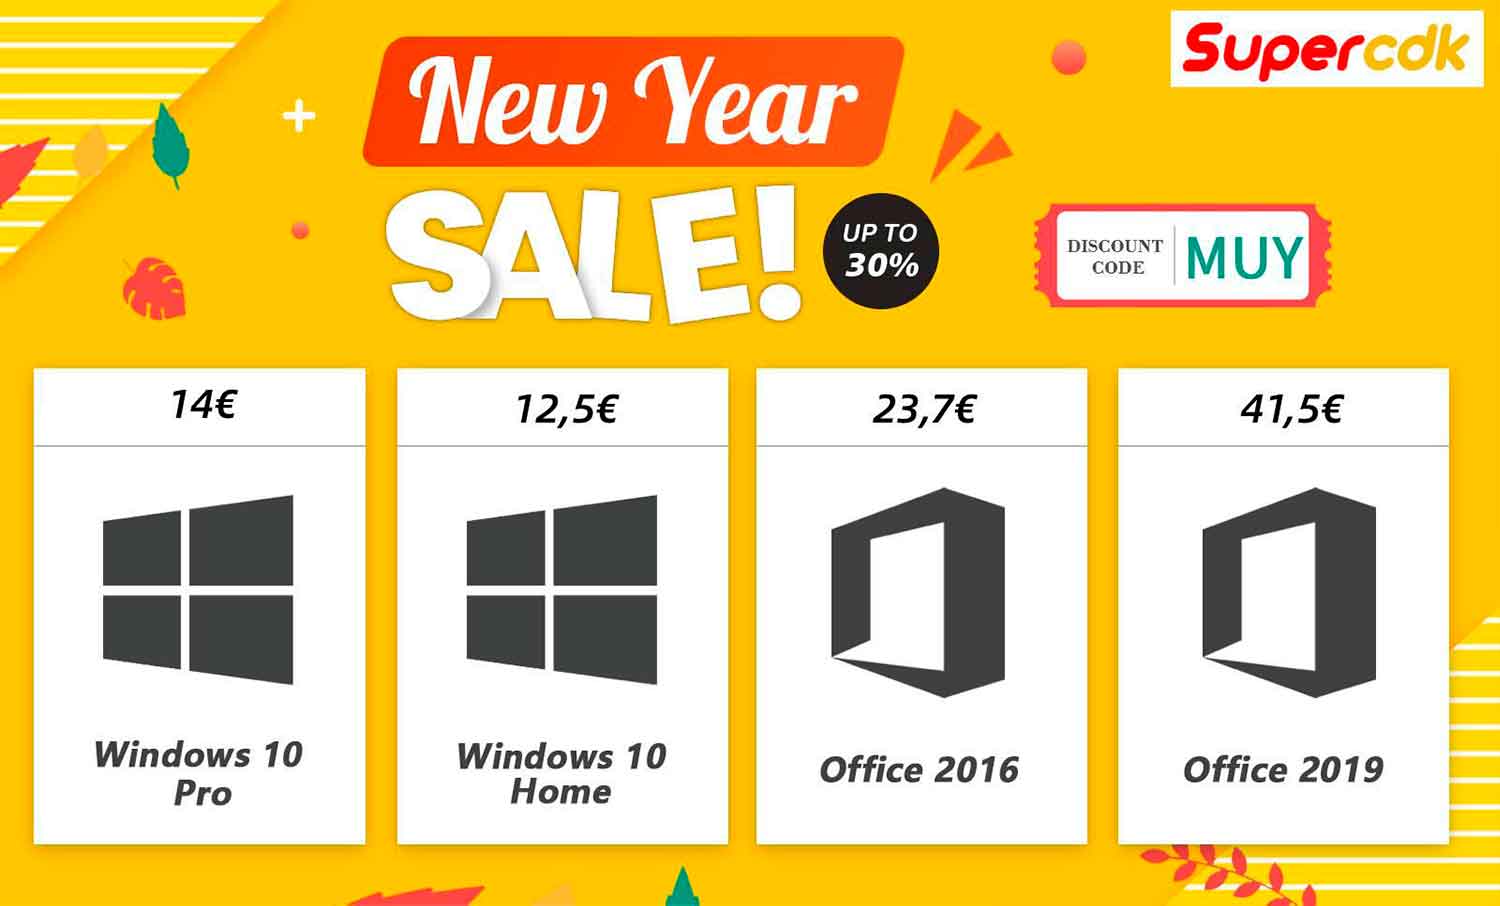 January sales: Windows 10 license for only €12.5